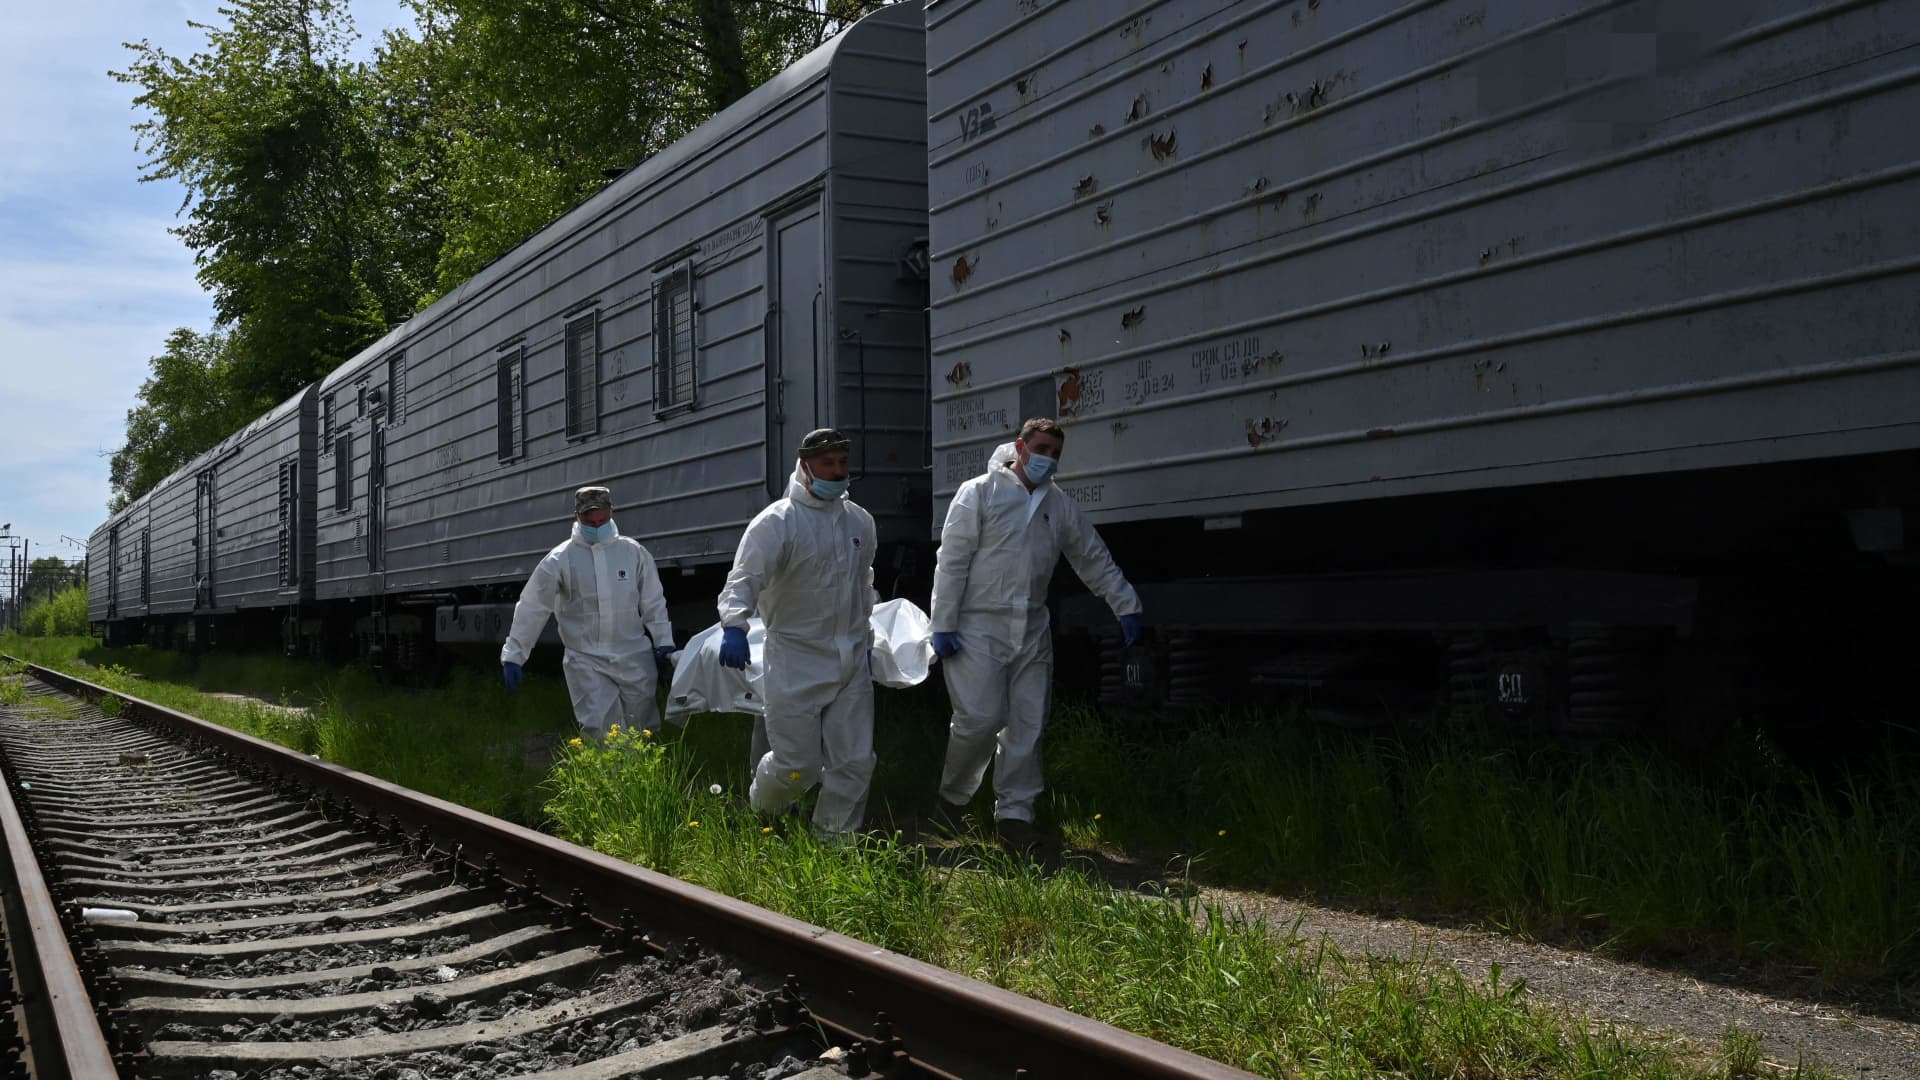 Ukrainian forensics experts carry the body of a Russian soldier exhumed in the village of Zavalivka, west of Kyiv, before it is stored in a refrigerated rail car stacked with the Russian dead on May 11, 2022.